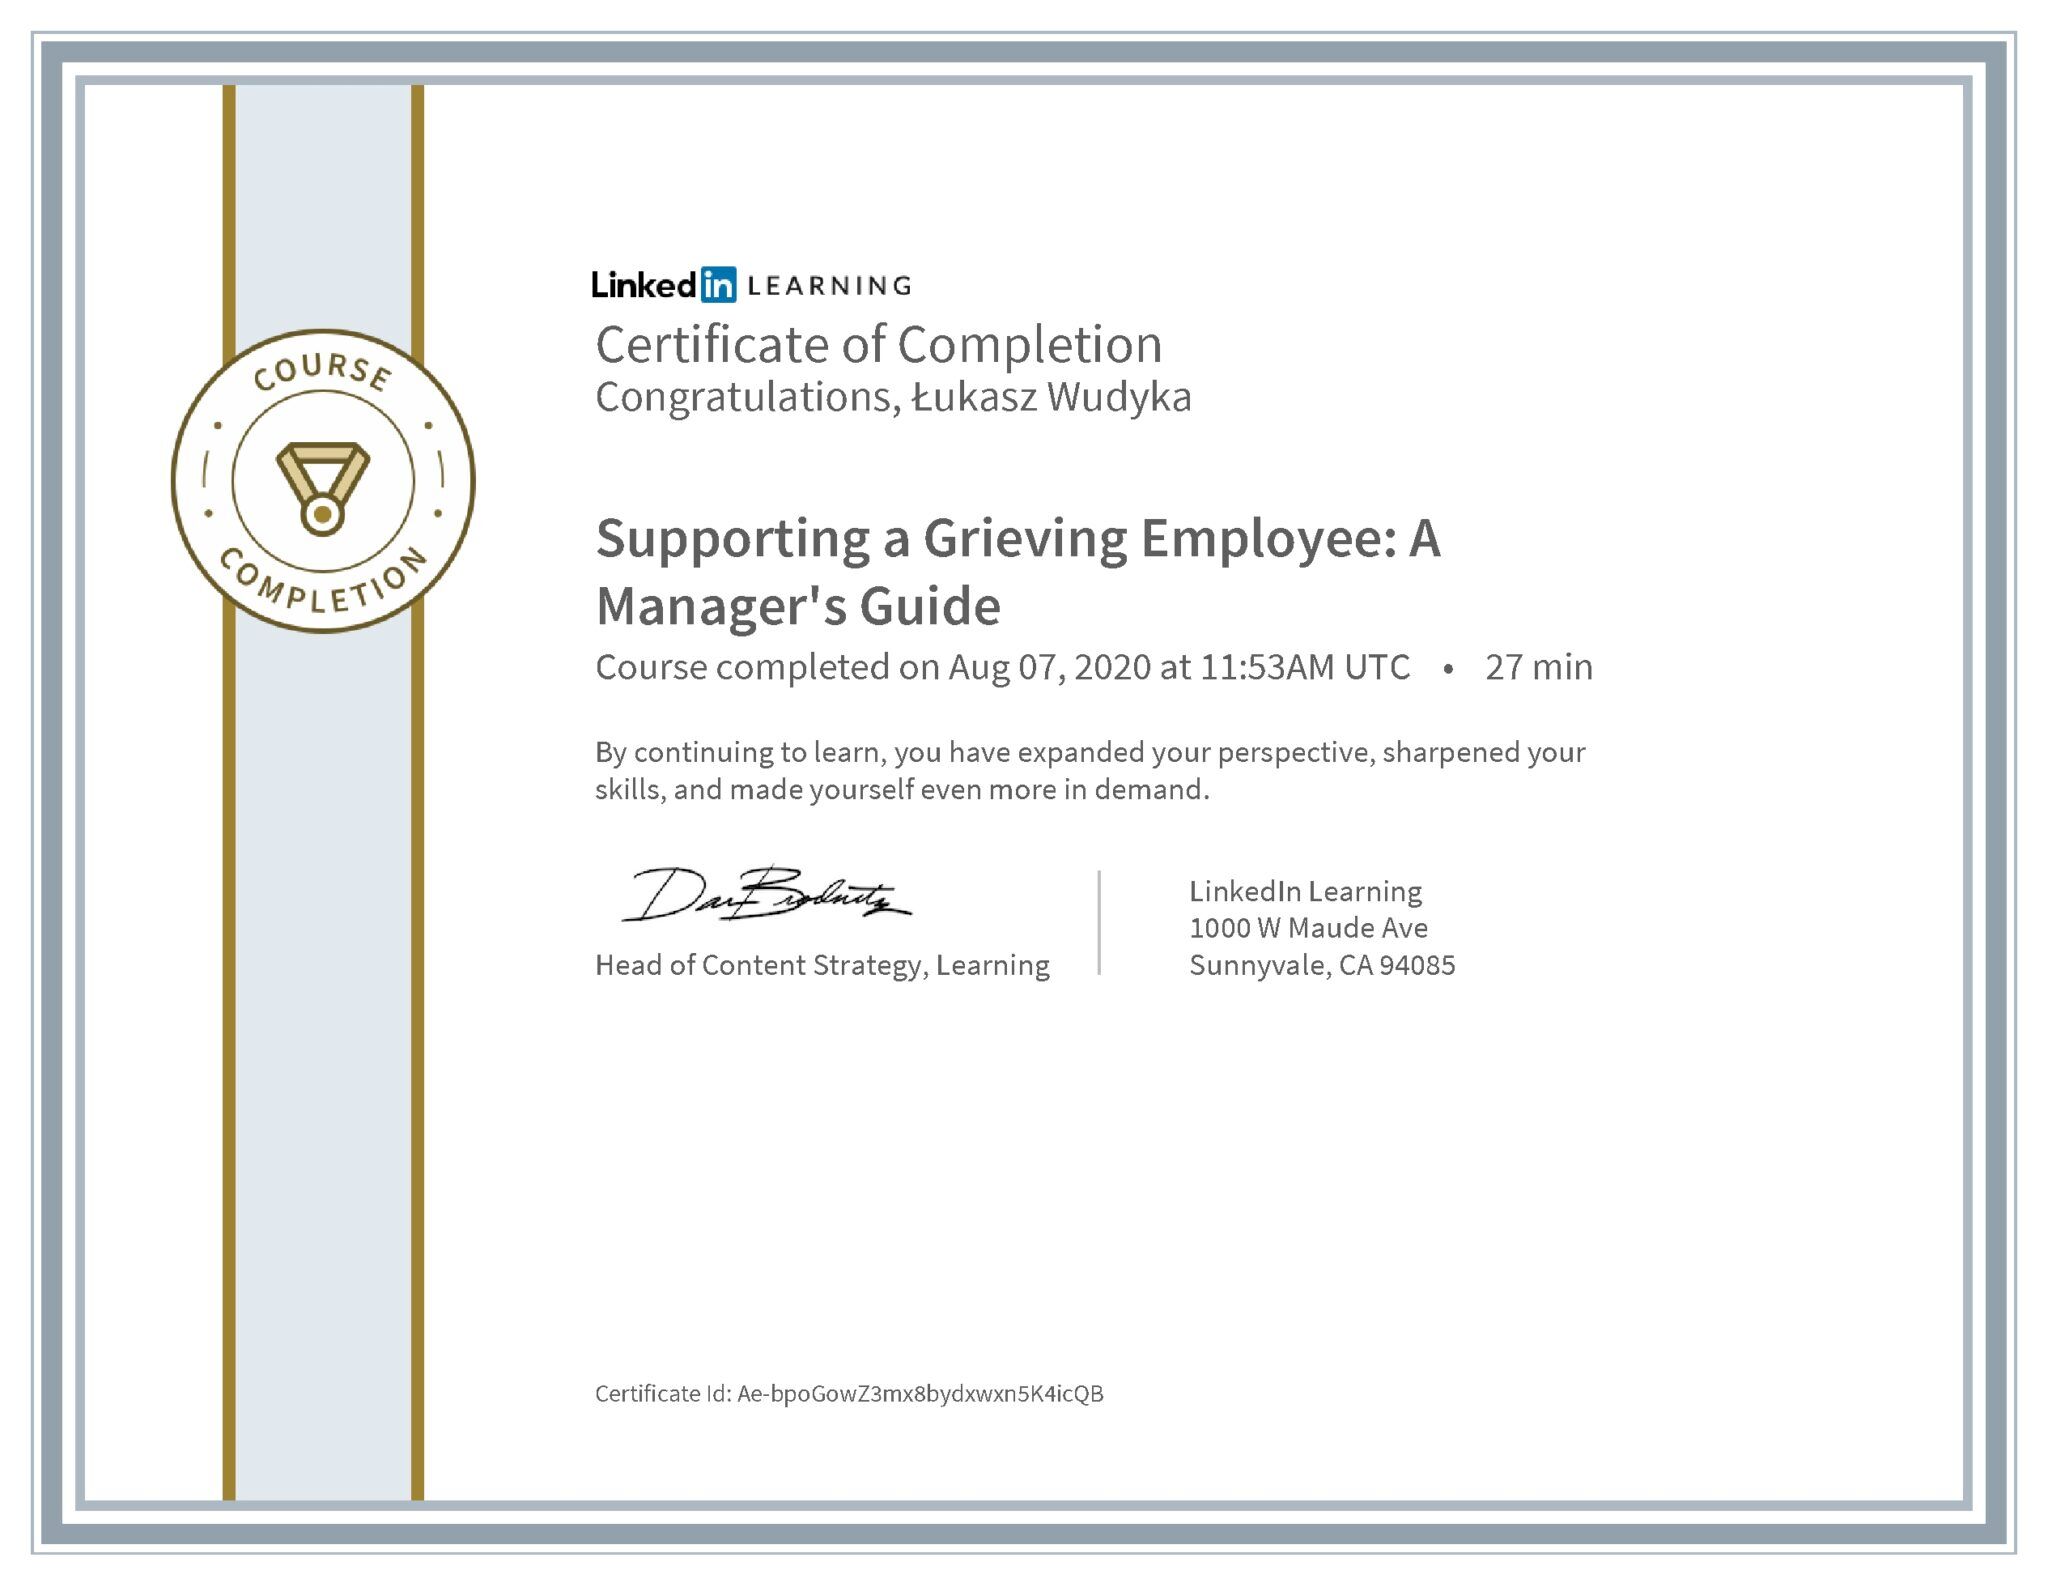 Łukasz Wudyka certyfikat LinkedIn Supporting a Grieving Employee: A Manager's Guide